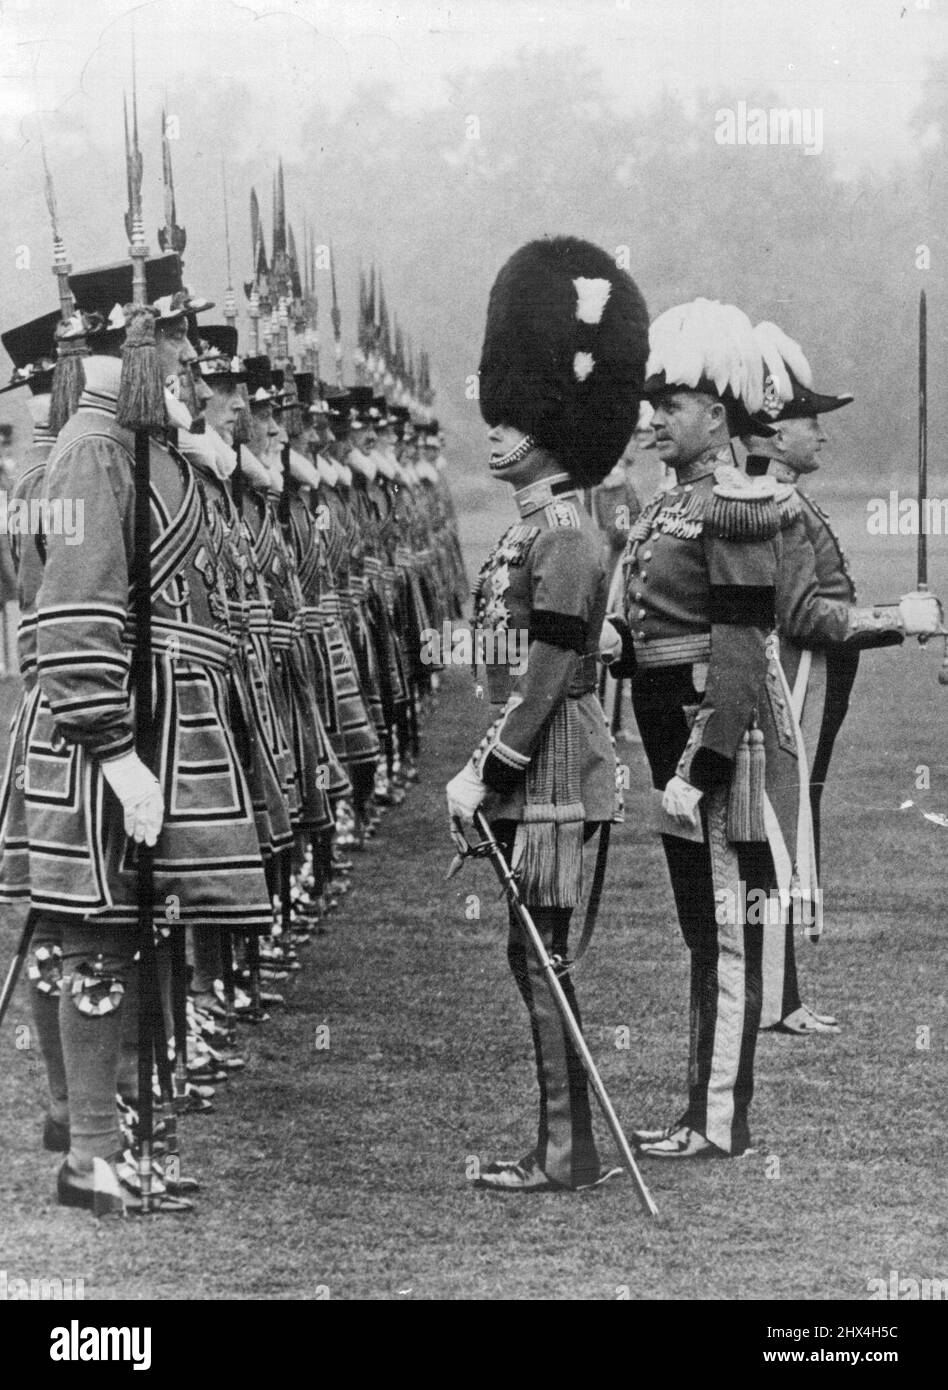 Official Photograph. The King Inspects Yeomen of the Guard in the grounds of Buckingham place. This is the First time for many years that the Reigning sovereign has inspected this ancient body of Men. H.M. King Edward VIII inspecting the King's Bodyguard of the Yeomen of the Guard seen in their picturesque uniform. June 26, 1936. (Photo by Sport & General Press Agency, Limited). Stock Photo